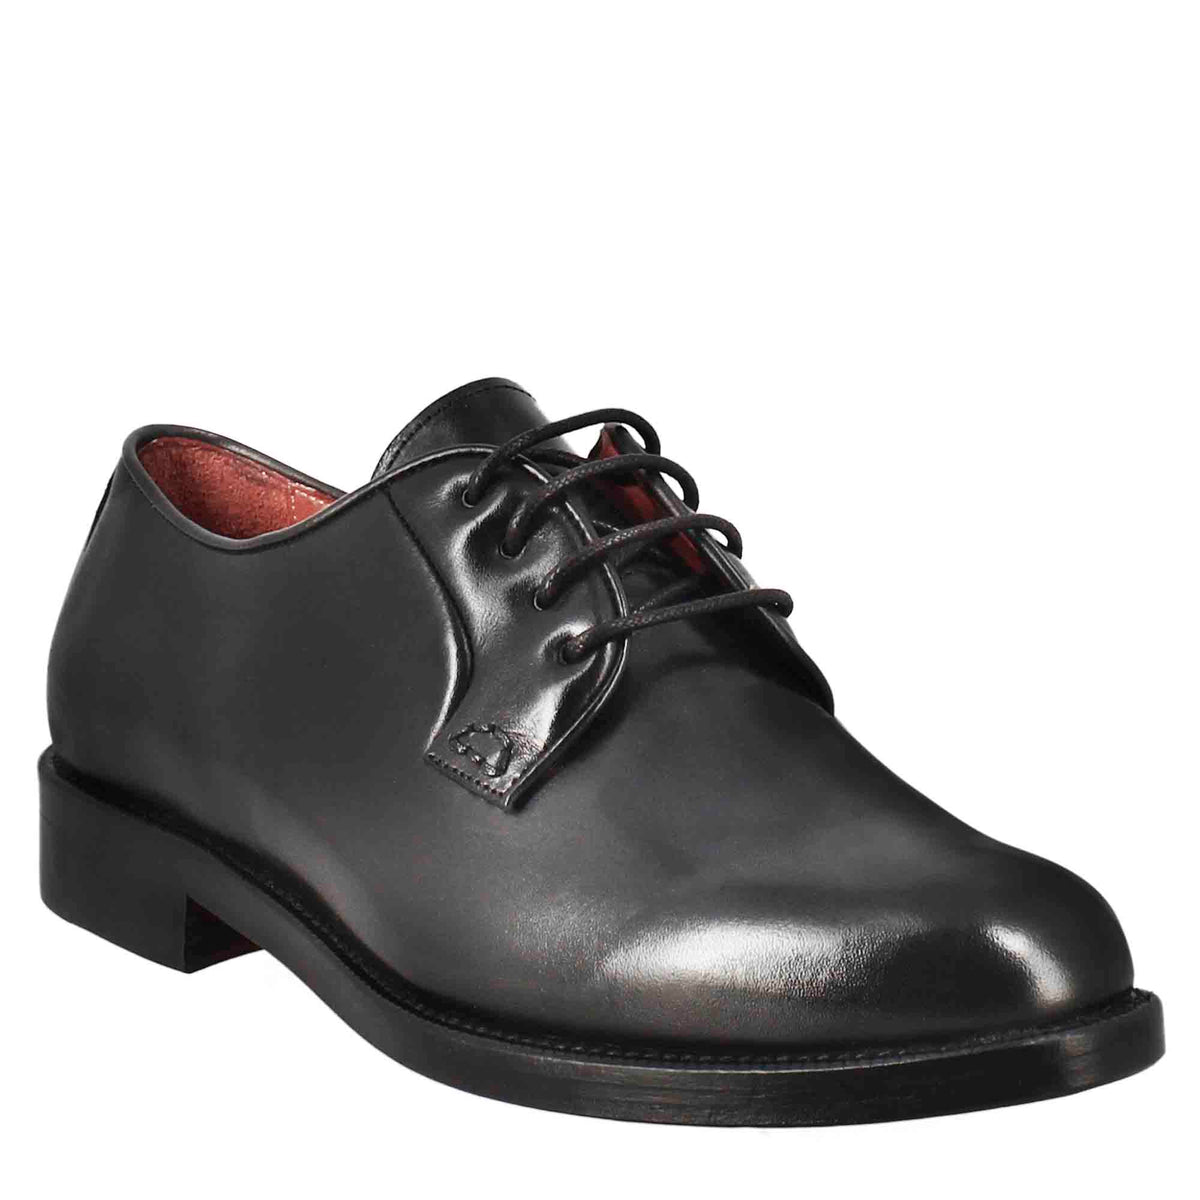 Smooth women's derby in black leather